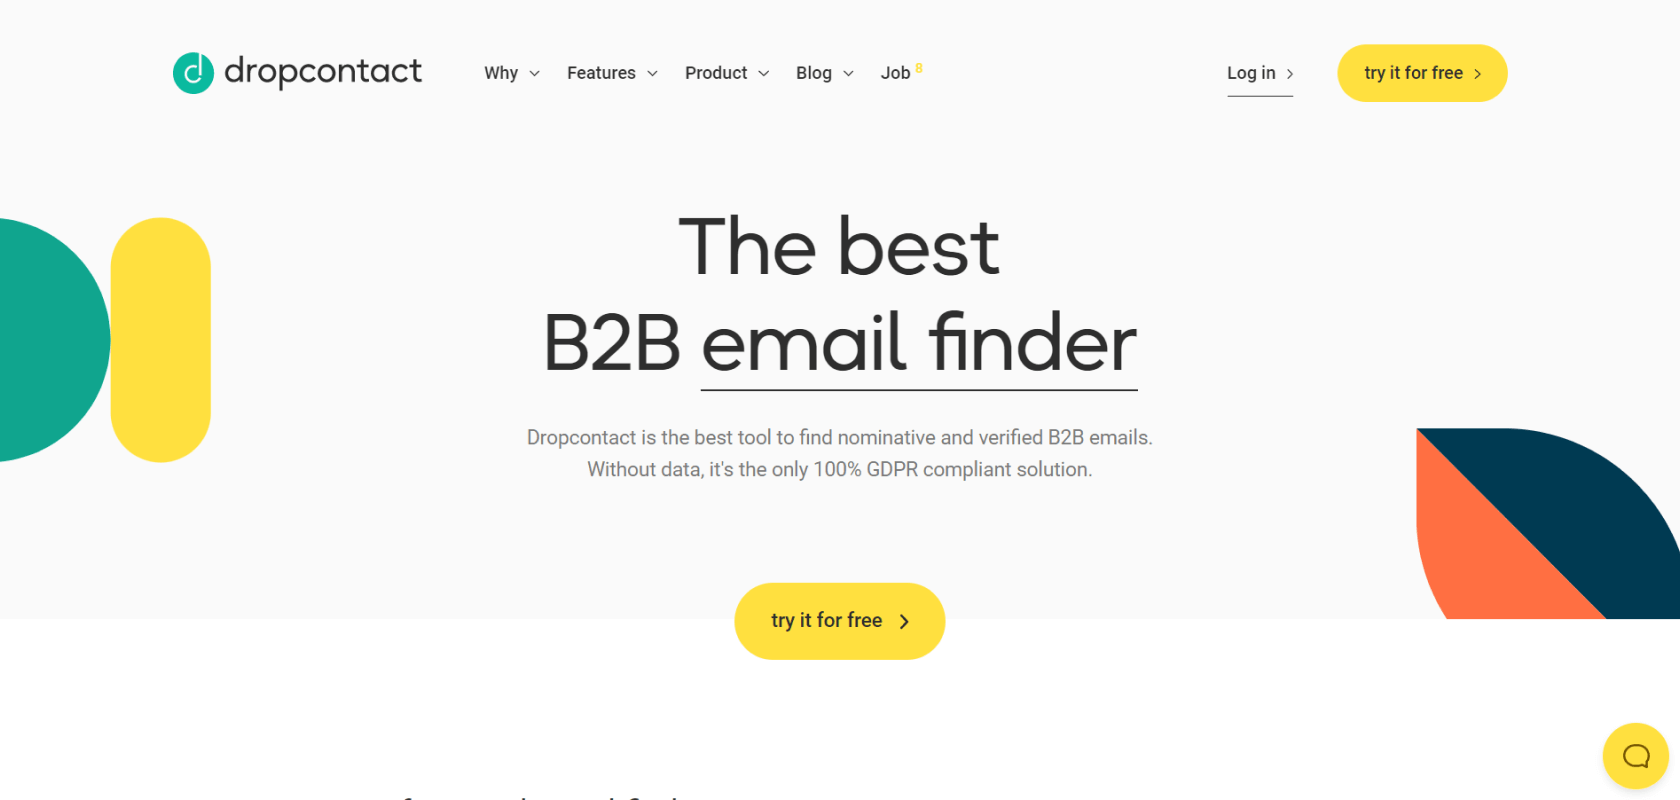 Dropcontact's email finder page